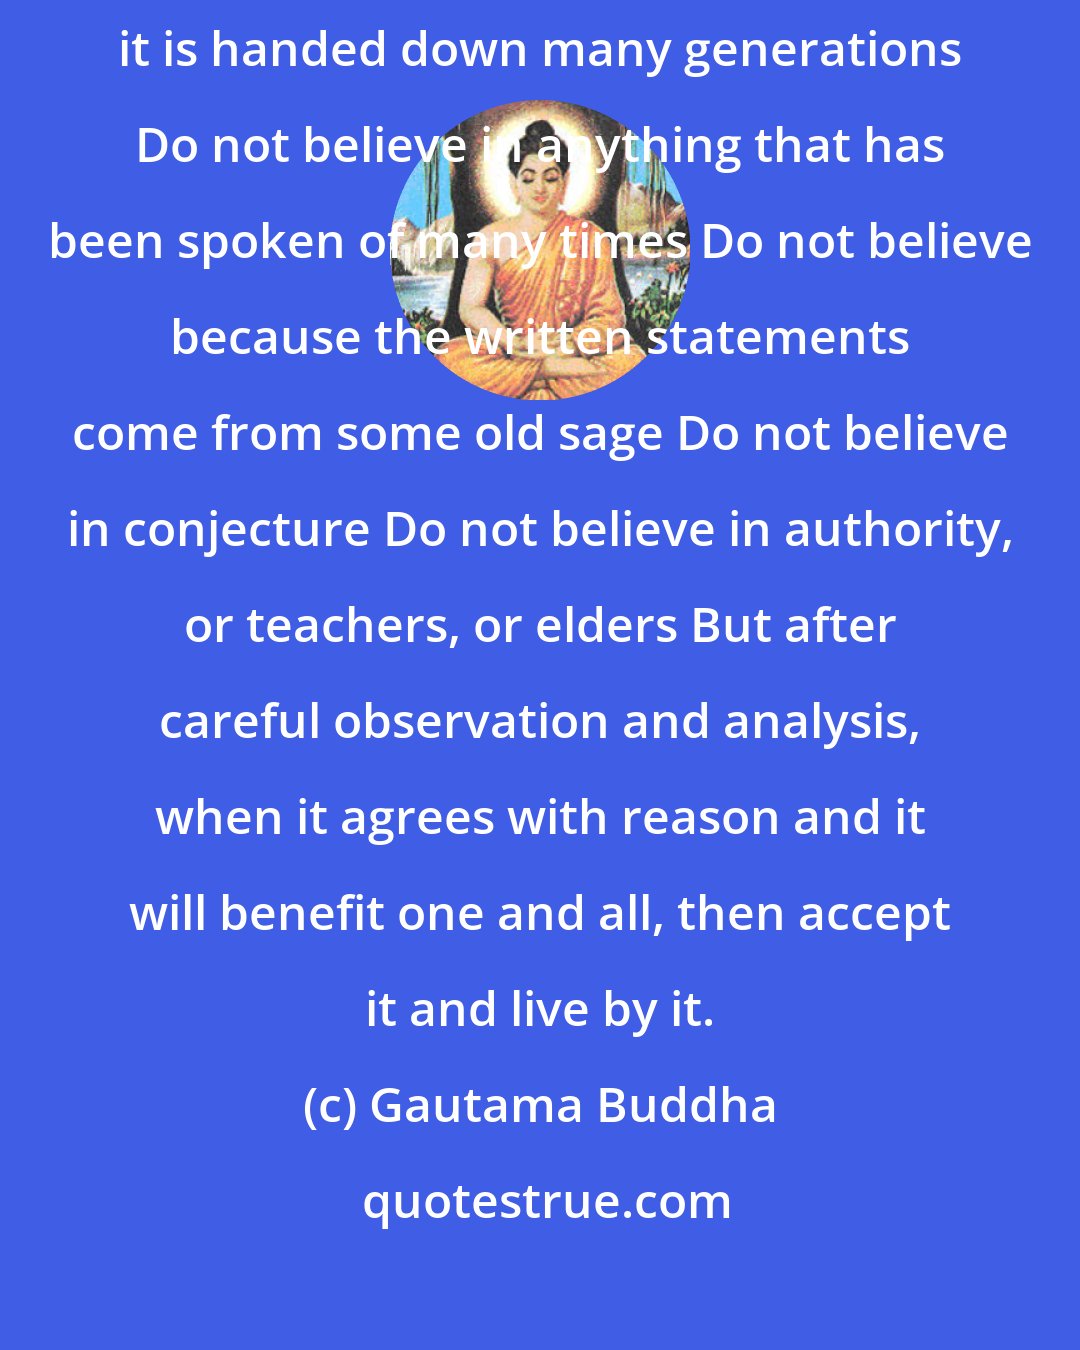 Gautama Buddha: Do not believe what you have heard Do not believe in tradition because it is handed down many generations Do not believe in anything that has been spoken of many times Do not believe because the written statements come from some old sage Do not believe in conjecture Do not believe in authority, or teachers, or elders But after careful observation and analysis, when it agrees with reason and it will benefit one and all, then accept it and live by it.